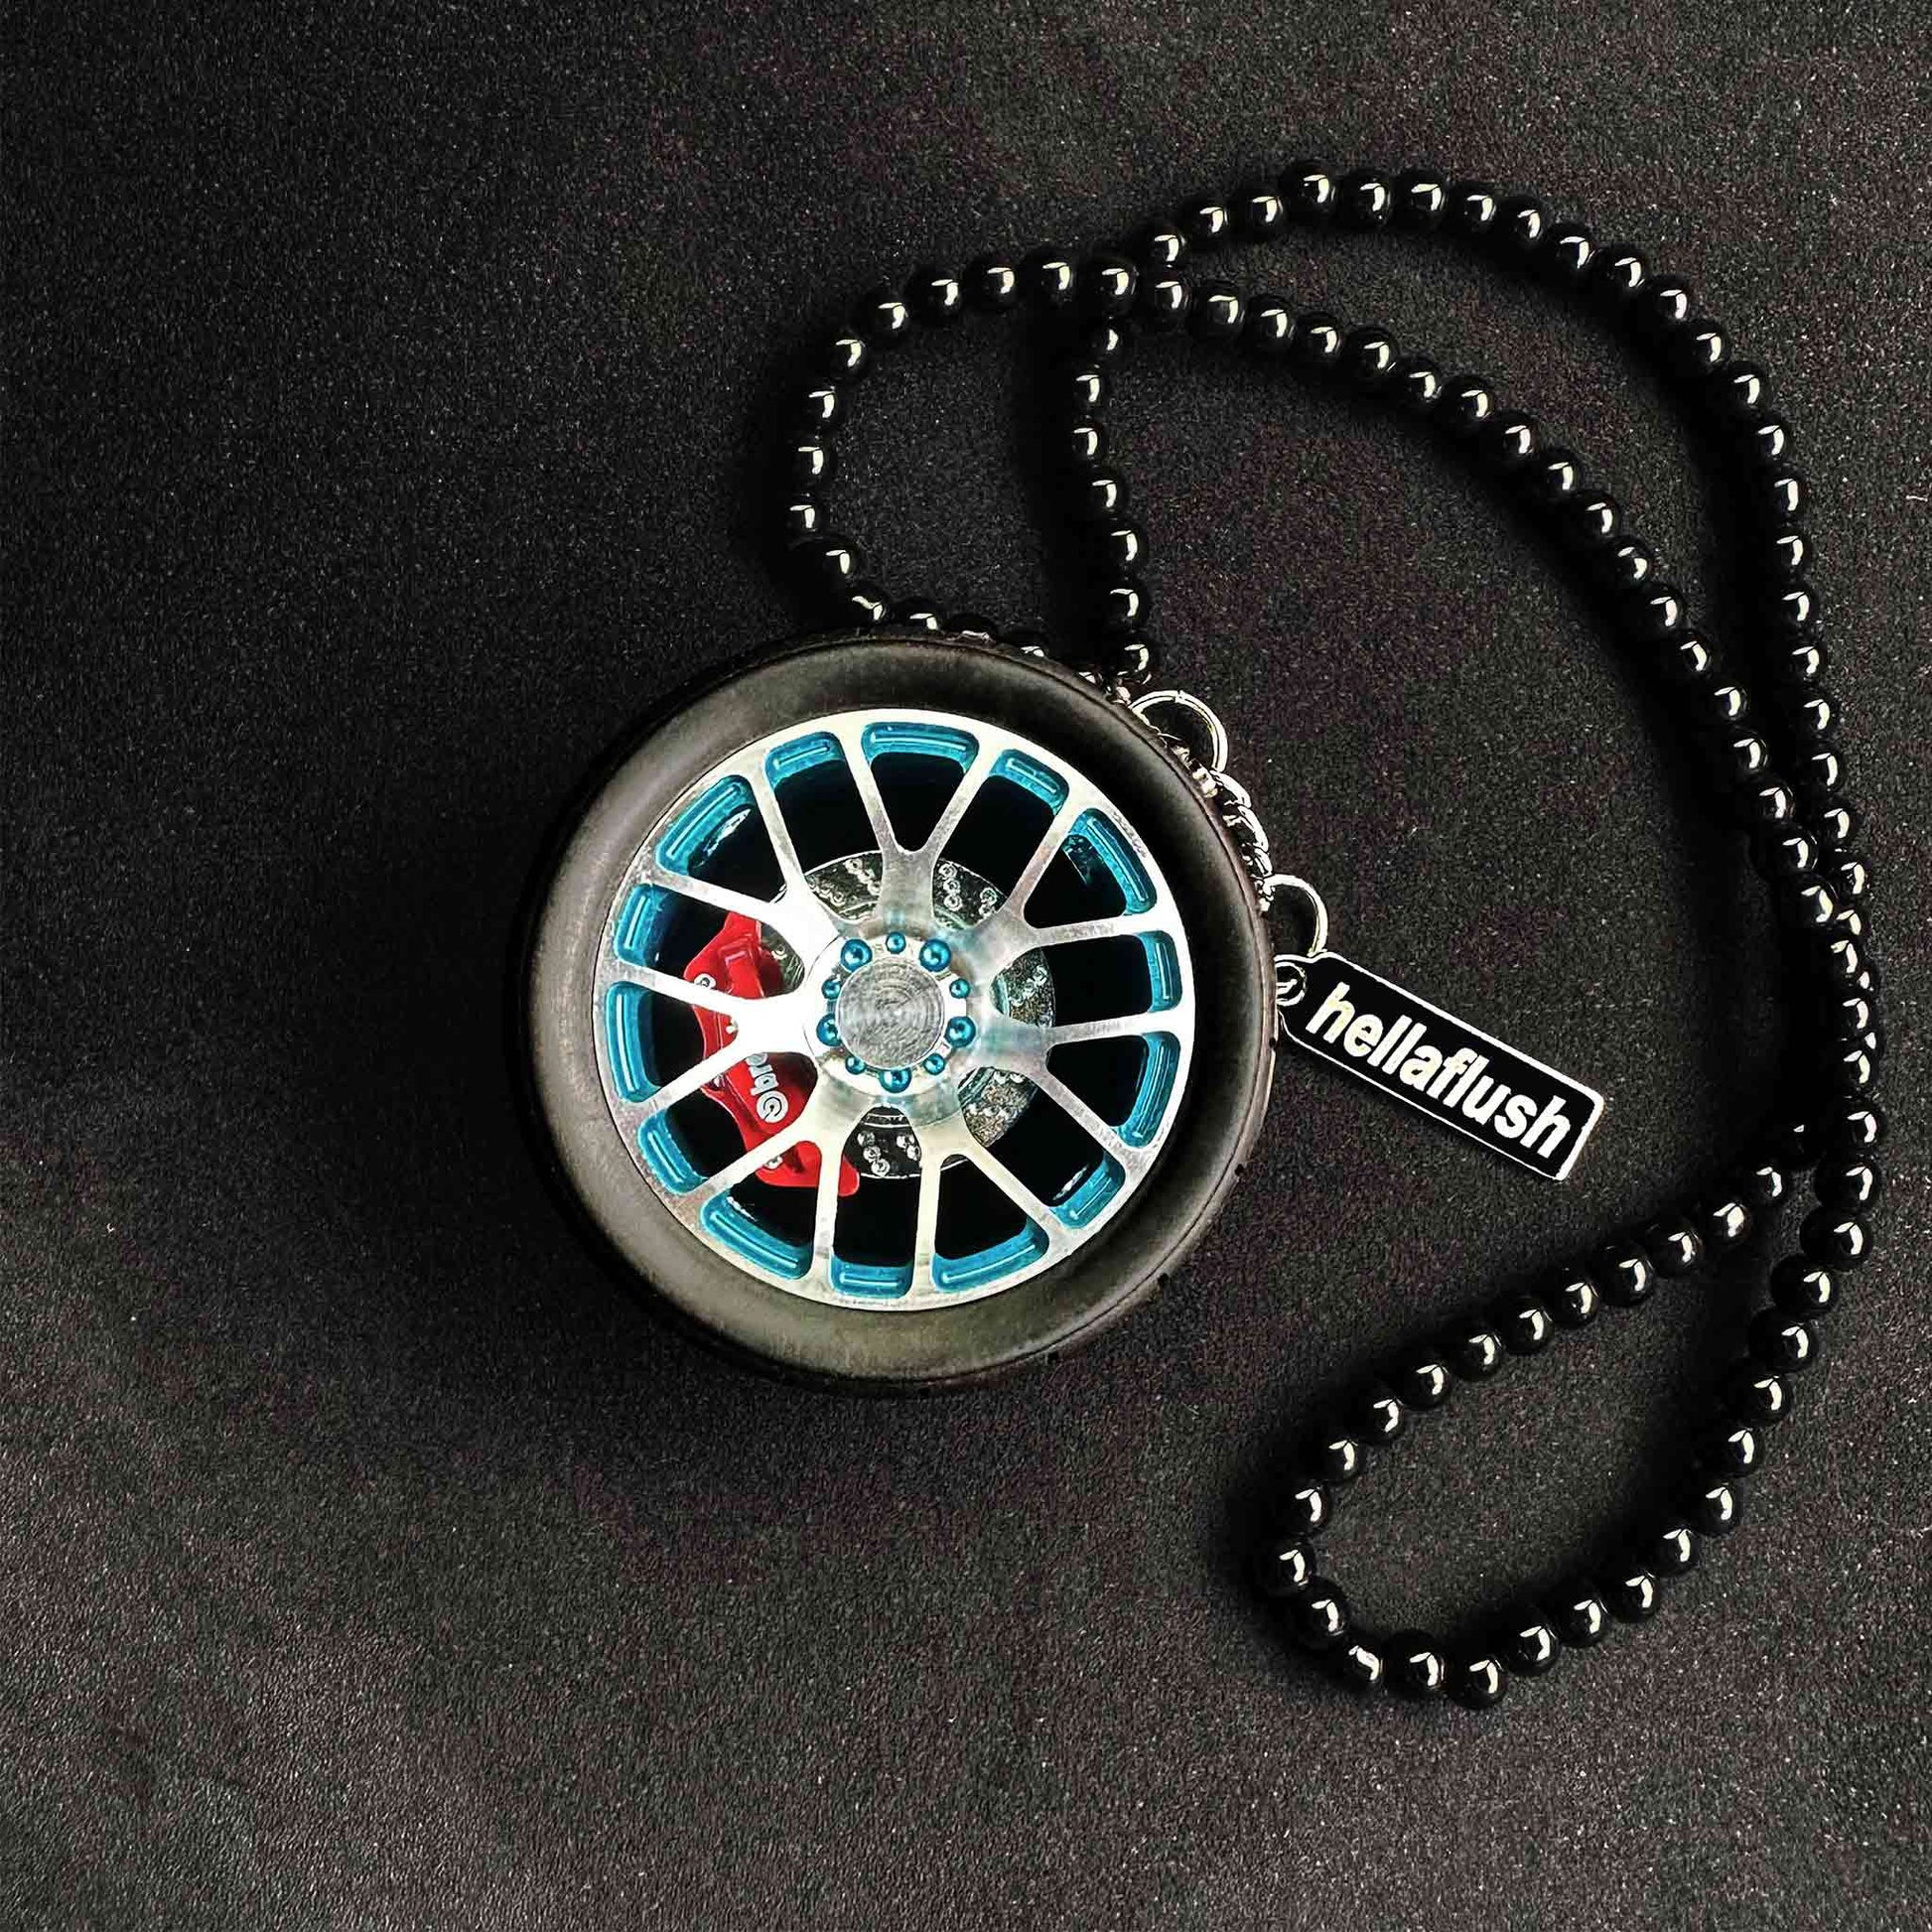 A blue BBS wheel air-freshener placed on a black background